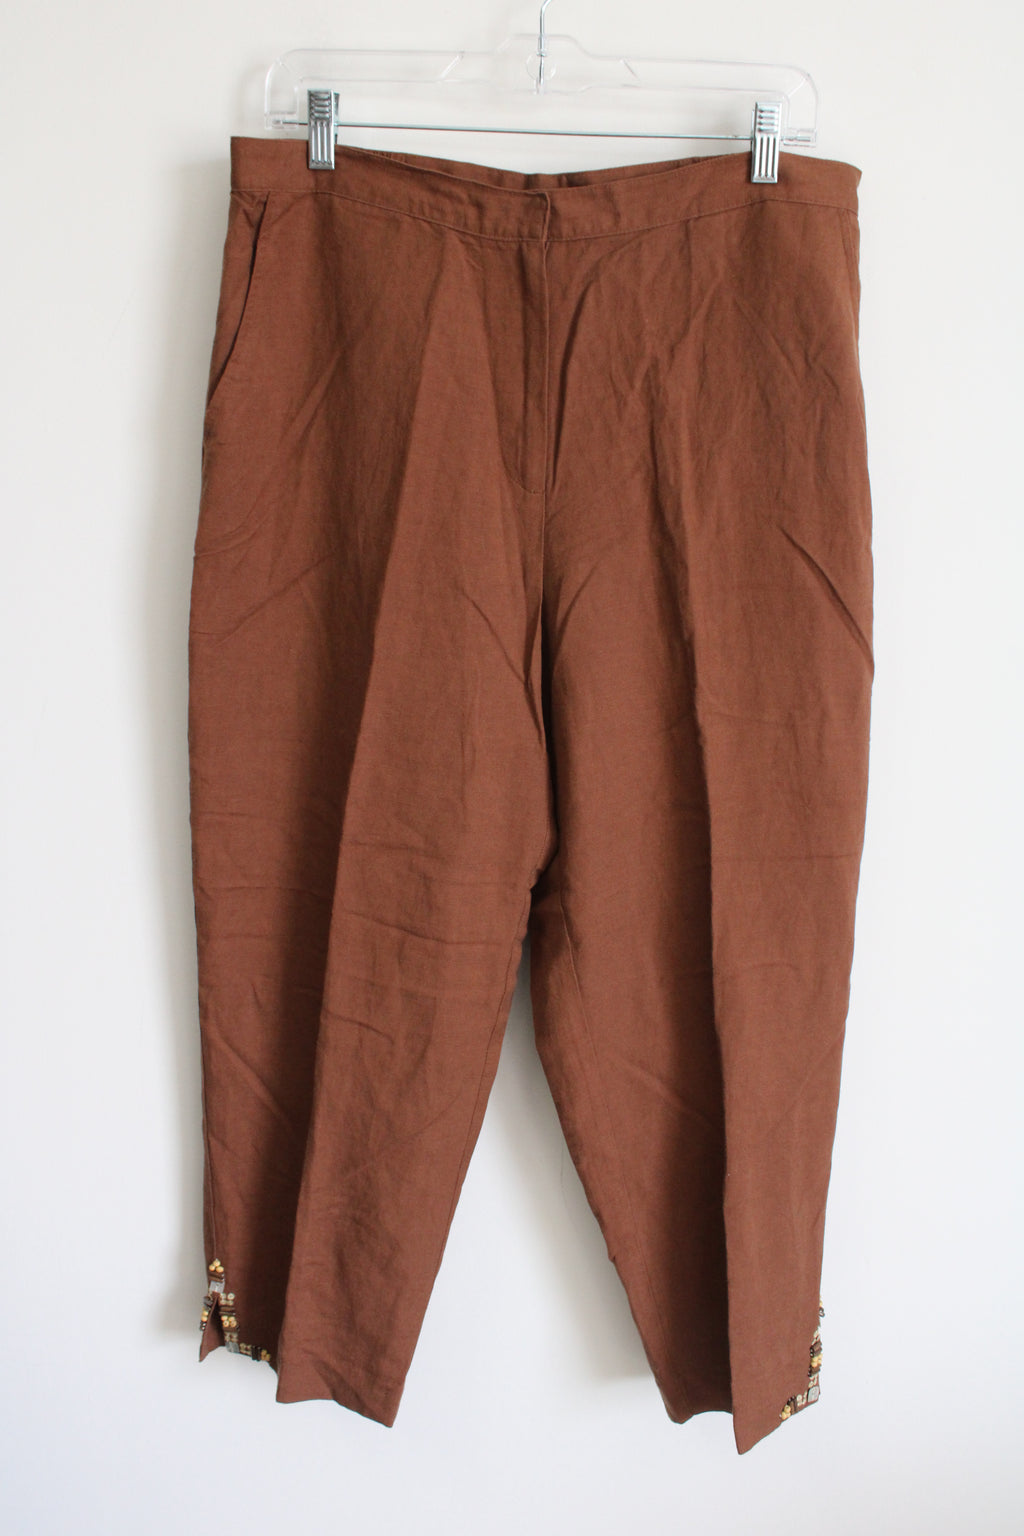 Ruby Rd. Brown Linen Ankle Pant | 12